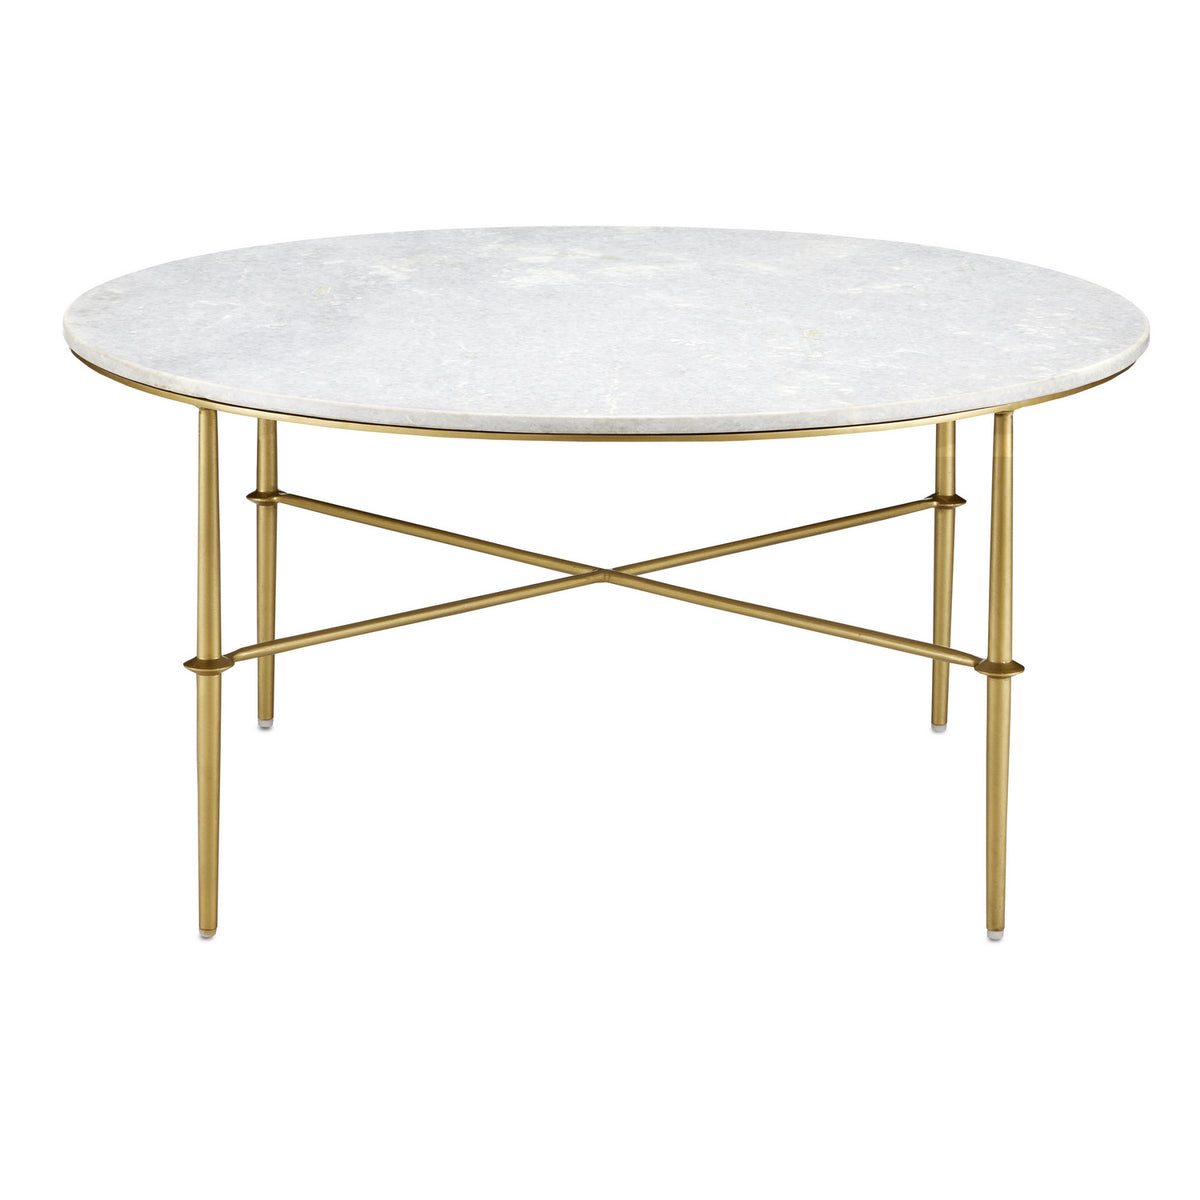 Currey and Company - 4000-0145 - Cocktail Table - Kira - White/Antique Brass